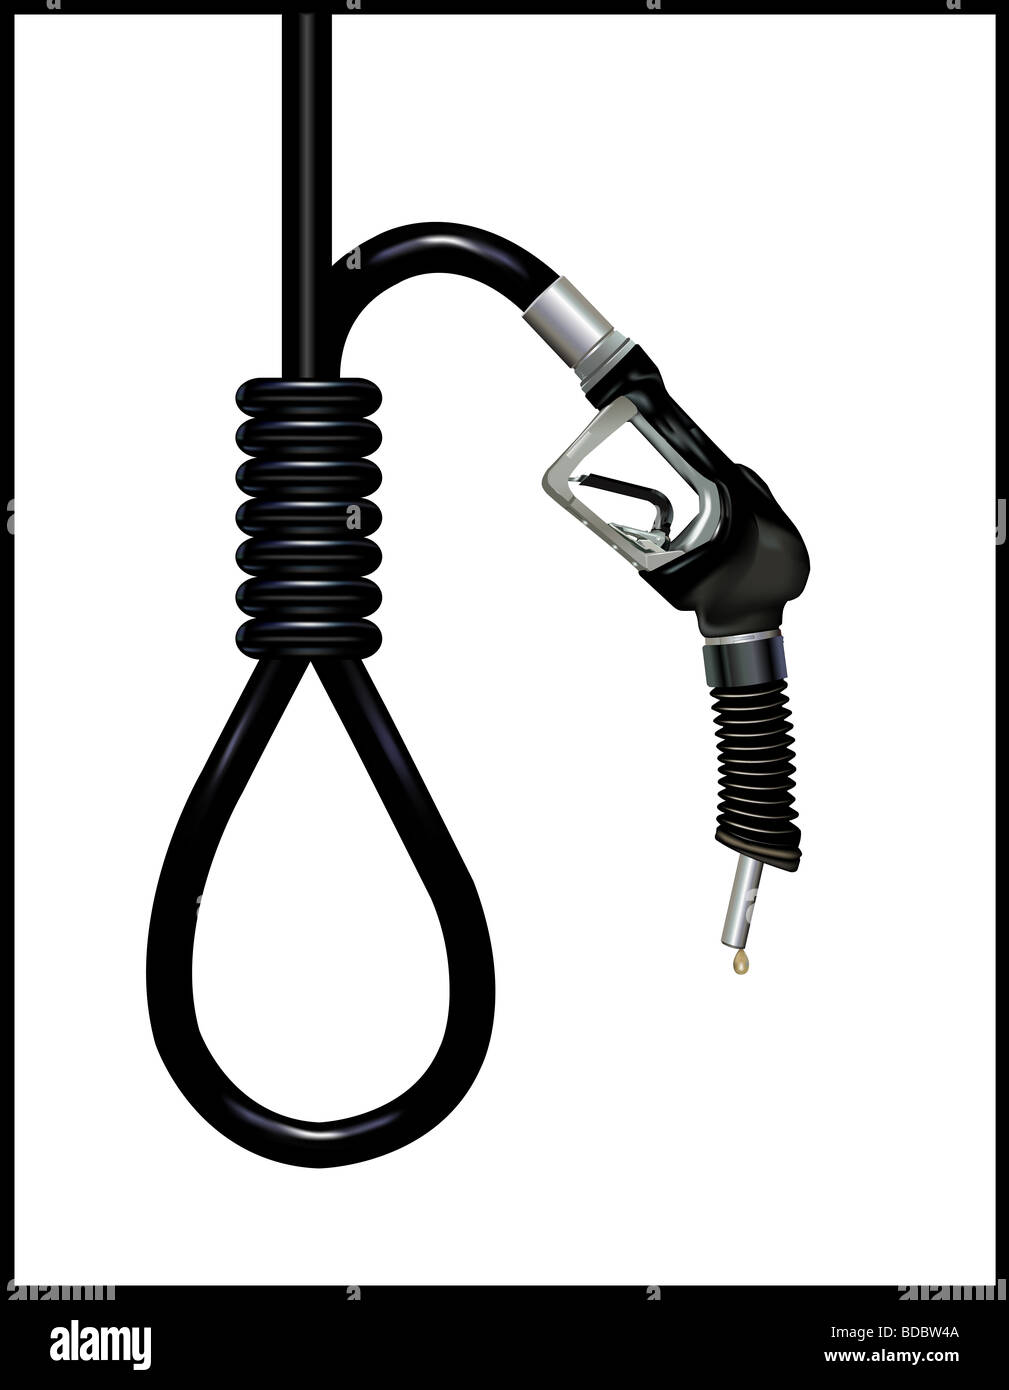 Noose with gasoline nozzle isolated over white background Stock Photo